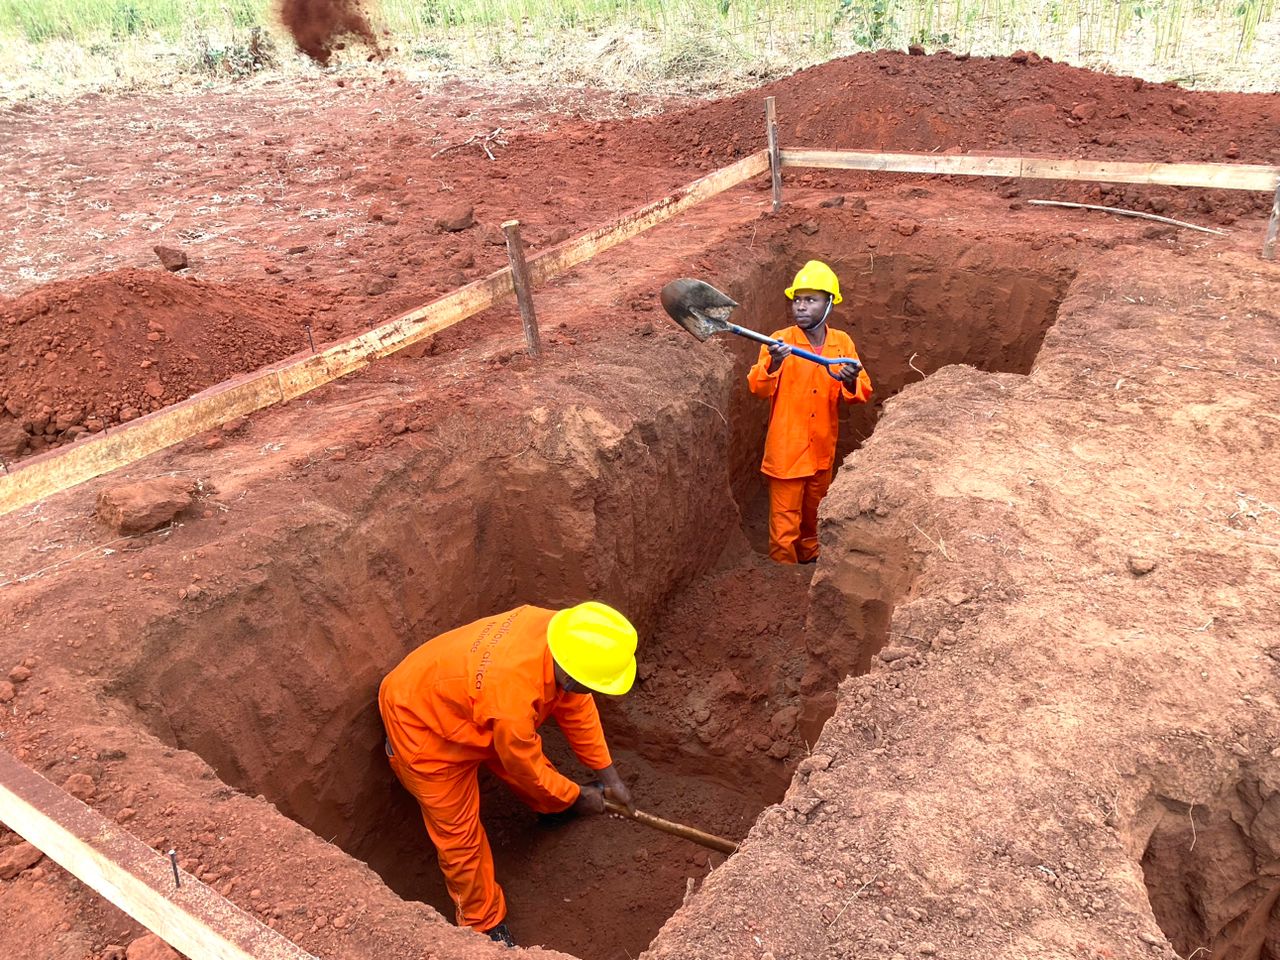 Two workers preparing the ground with shovels